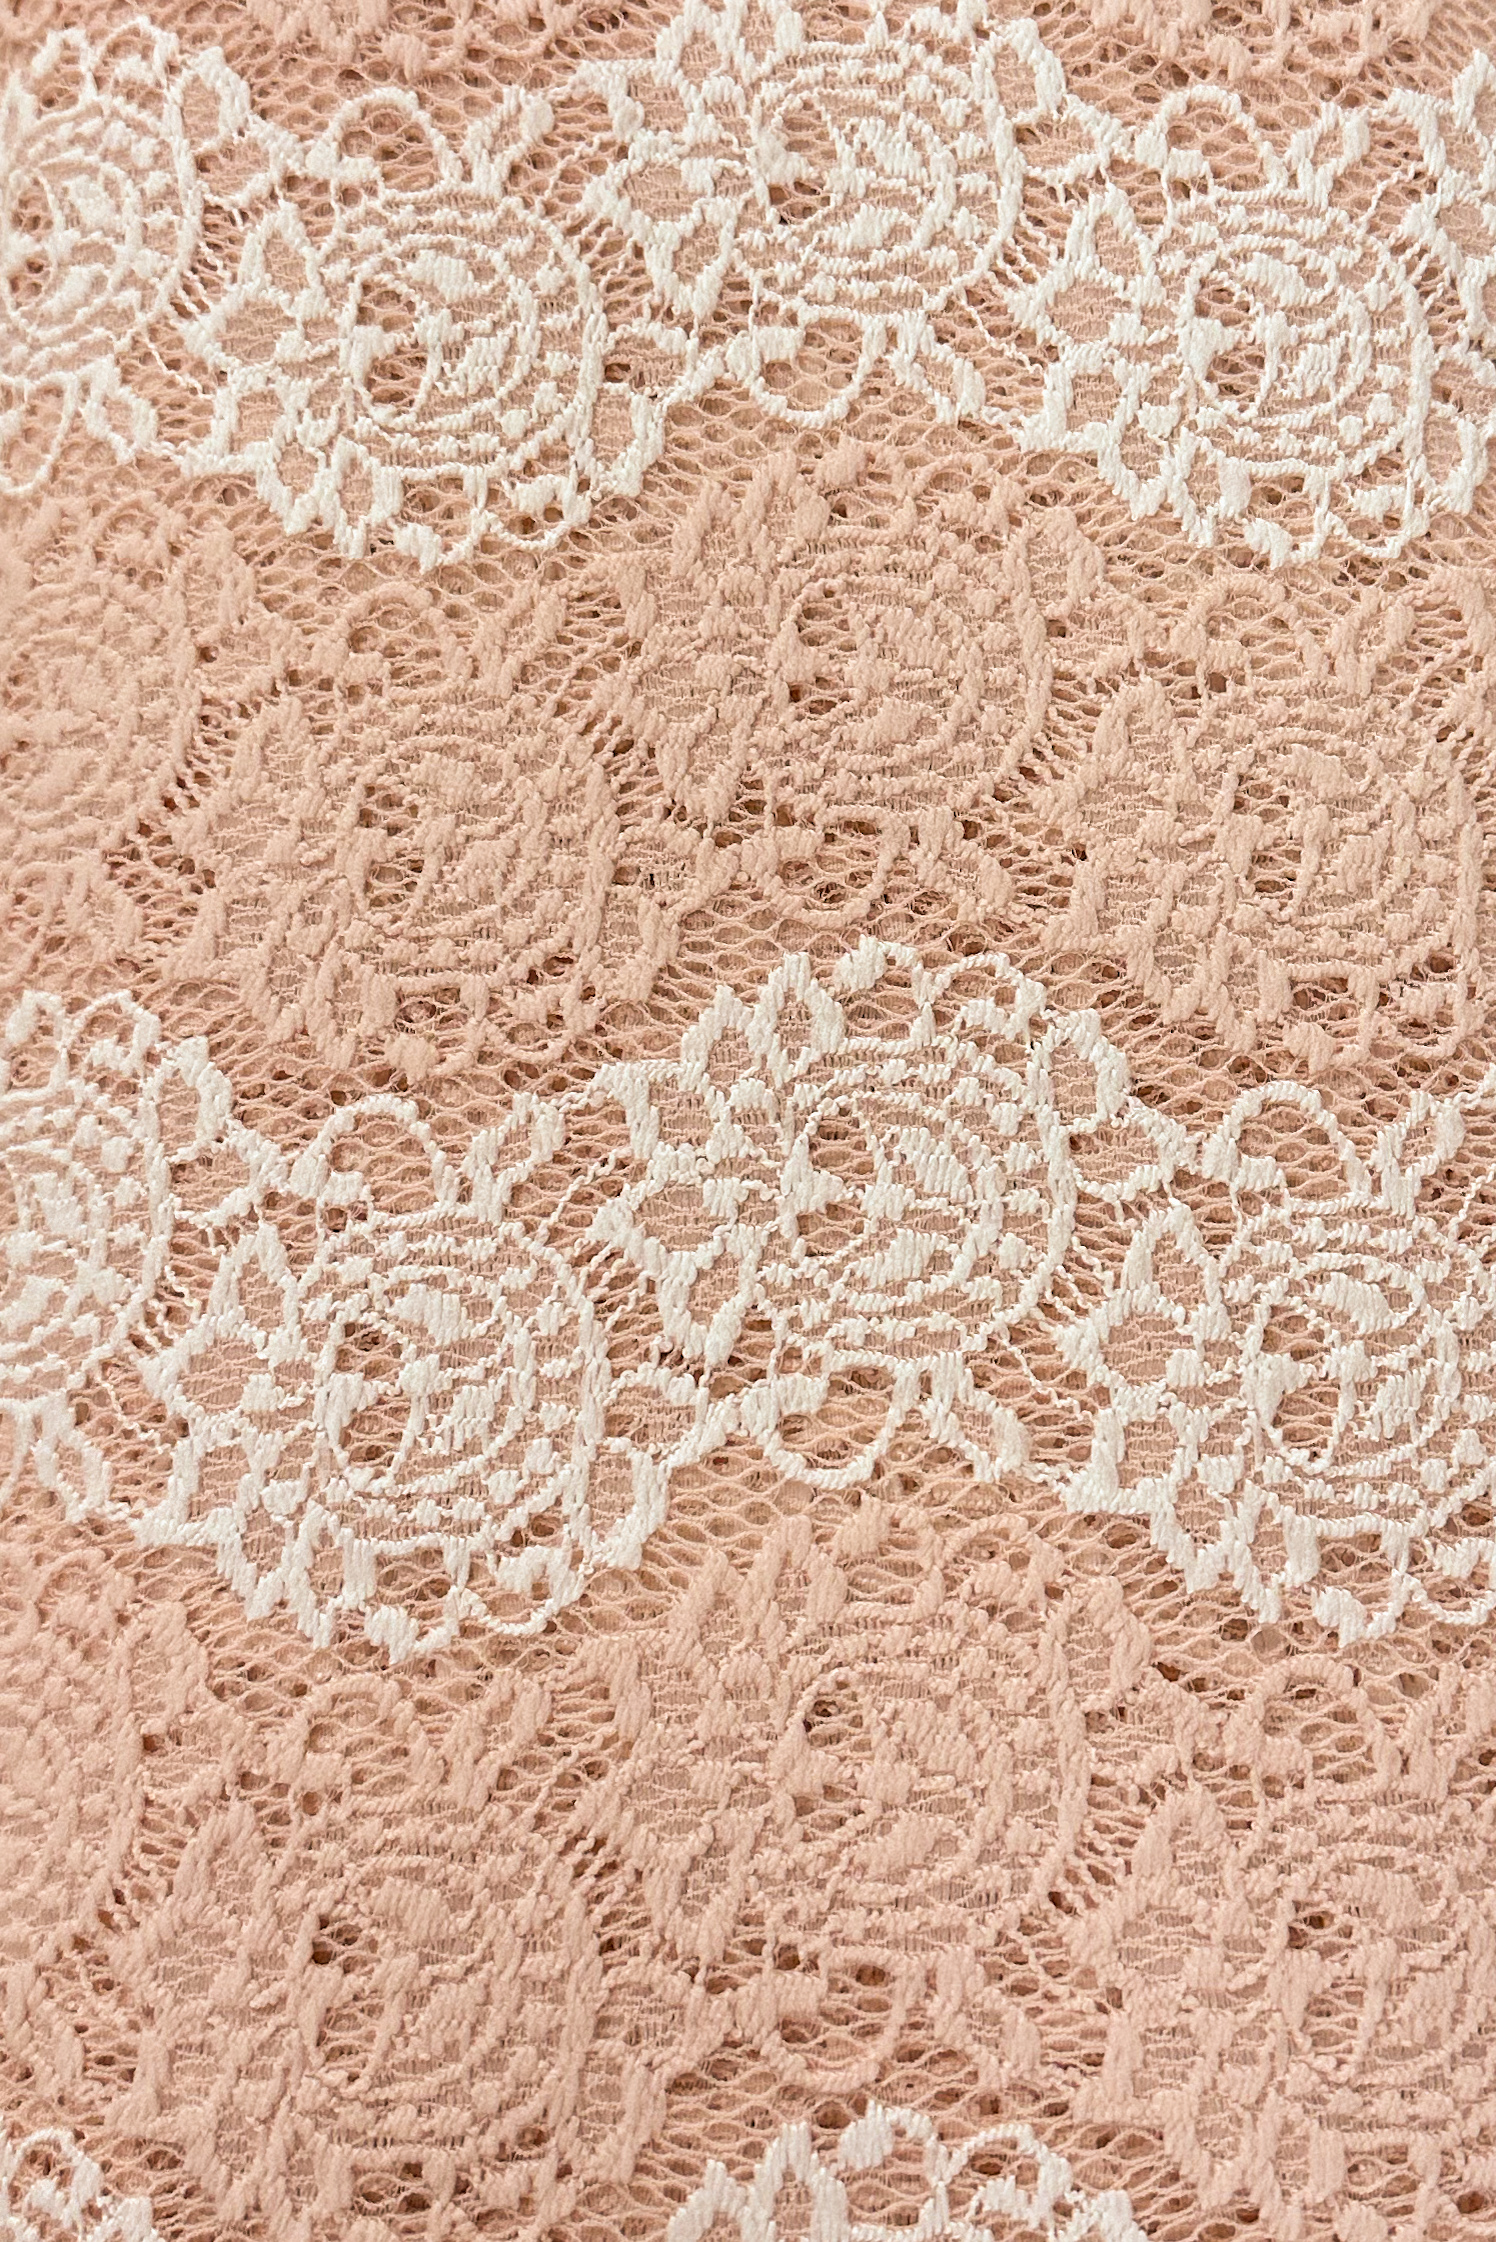 Blush and White Floral All Over Stretch Lace Fabric